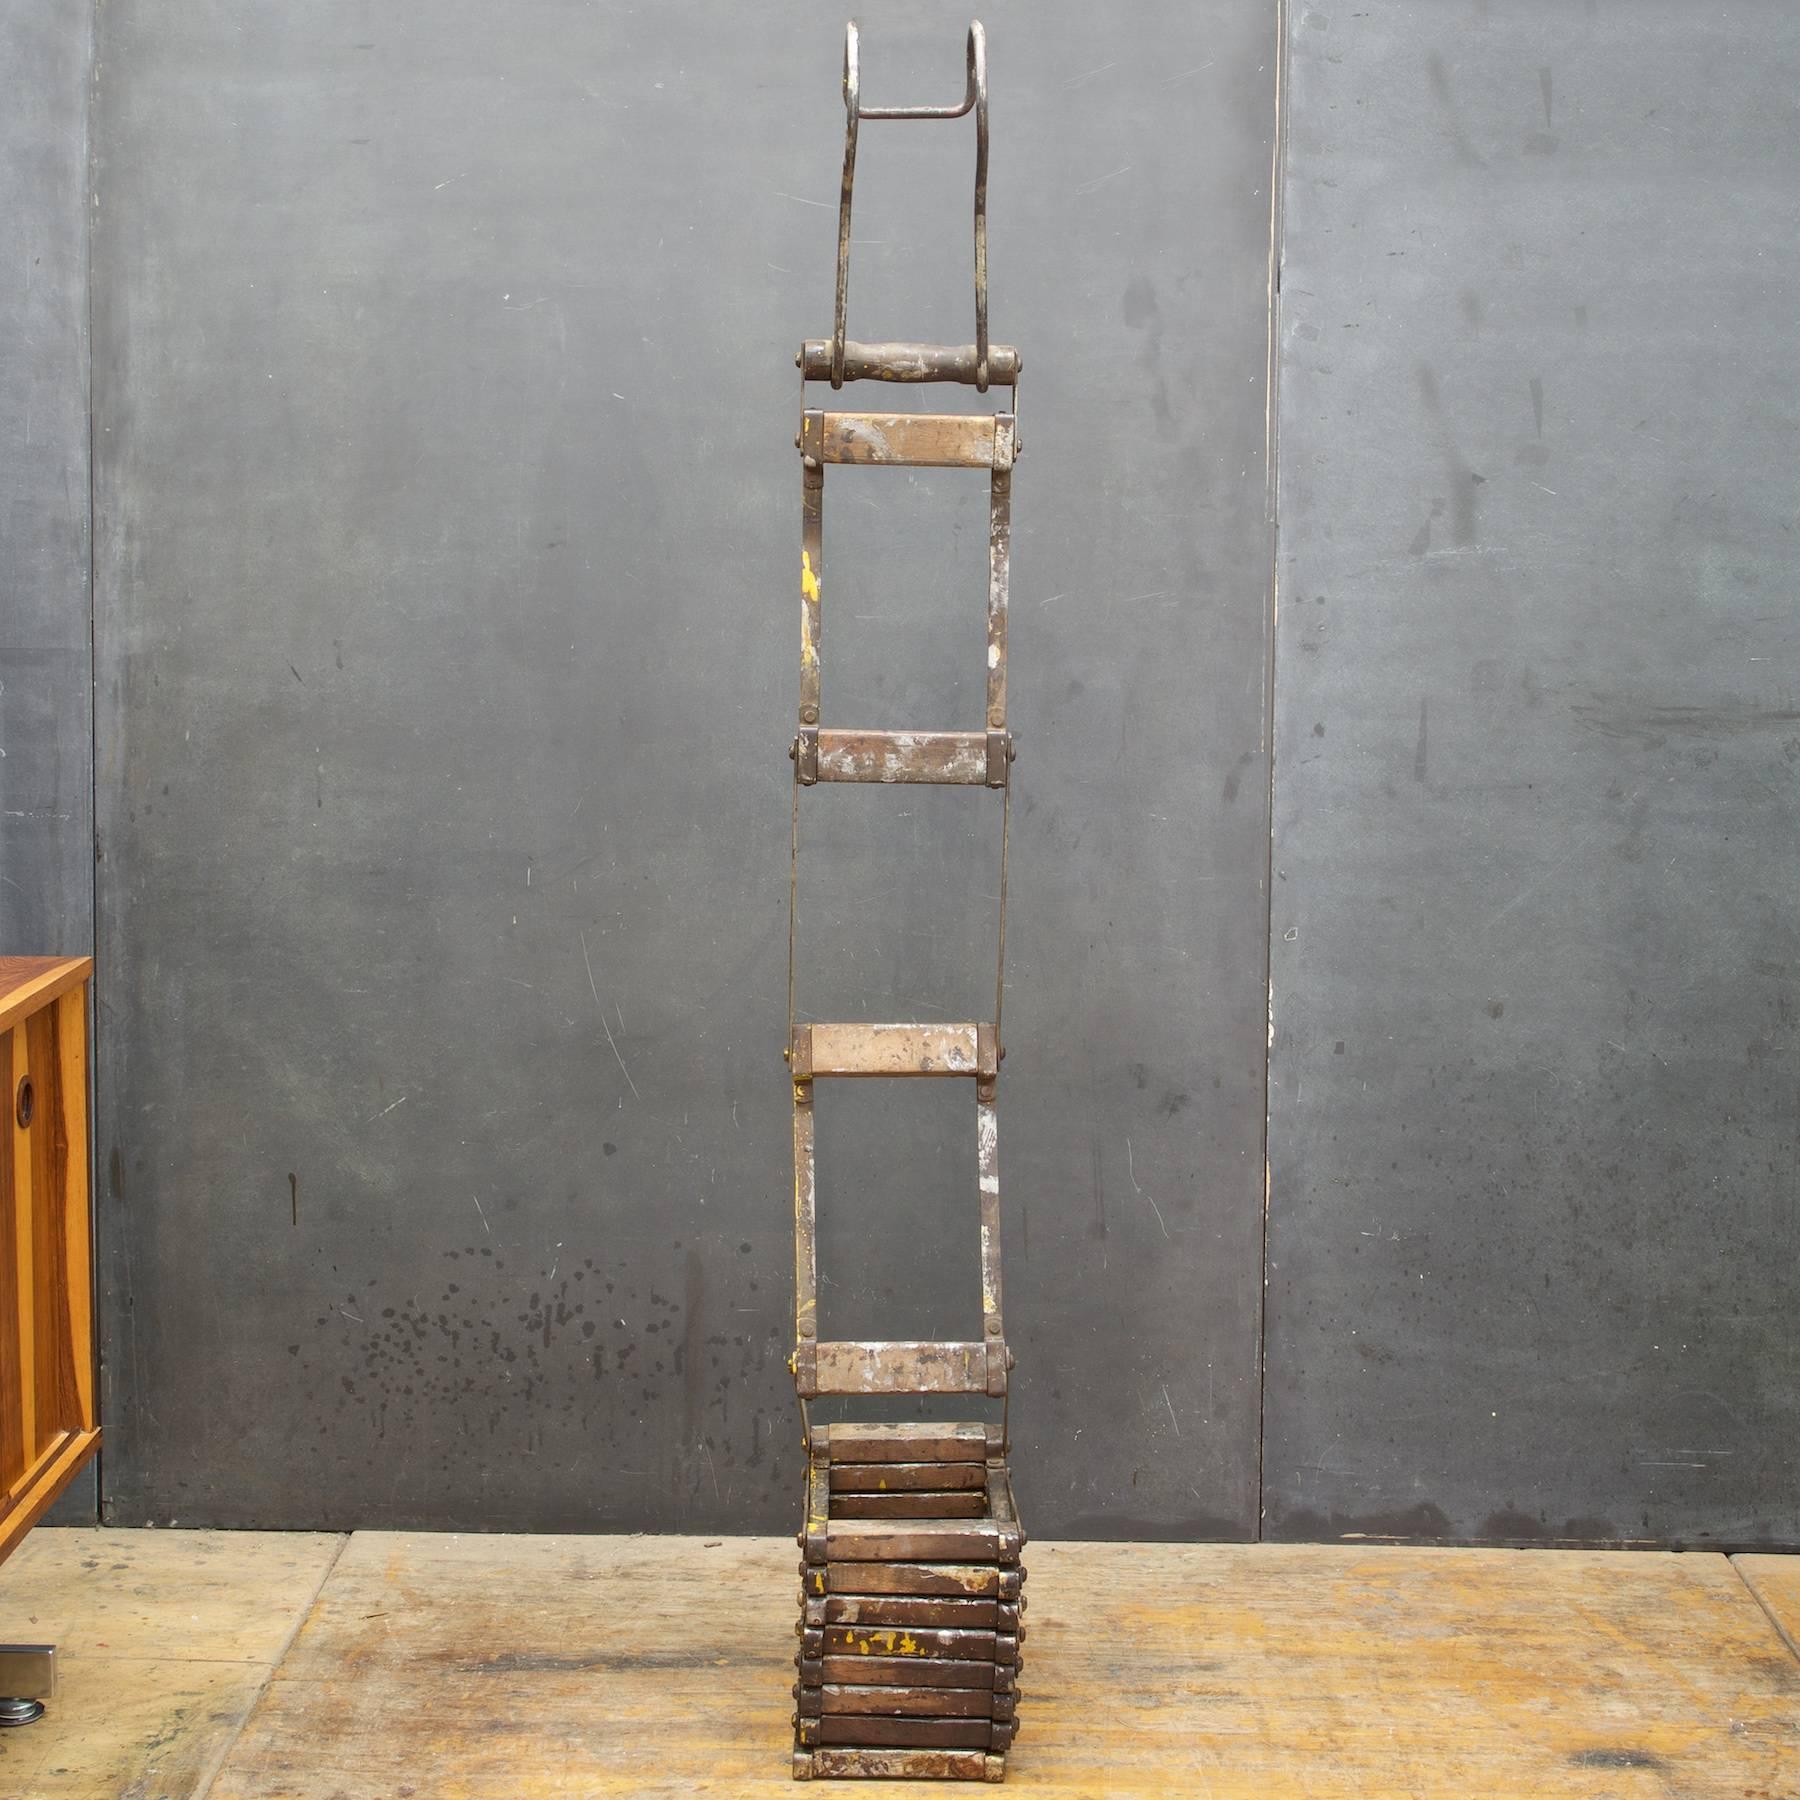 A vintage relic sold as a prop. An antique collapsible Early-century wooden and steel ladder. Each Rung Segment is 14 inches and space between rungs is about 12 inches.  Seems strong, the wood is not dry or weak, but I would seriously test this